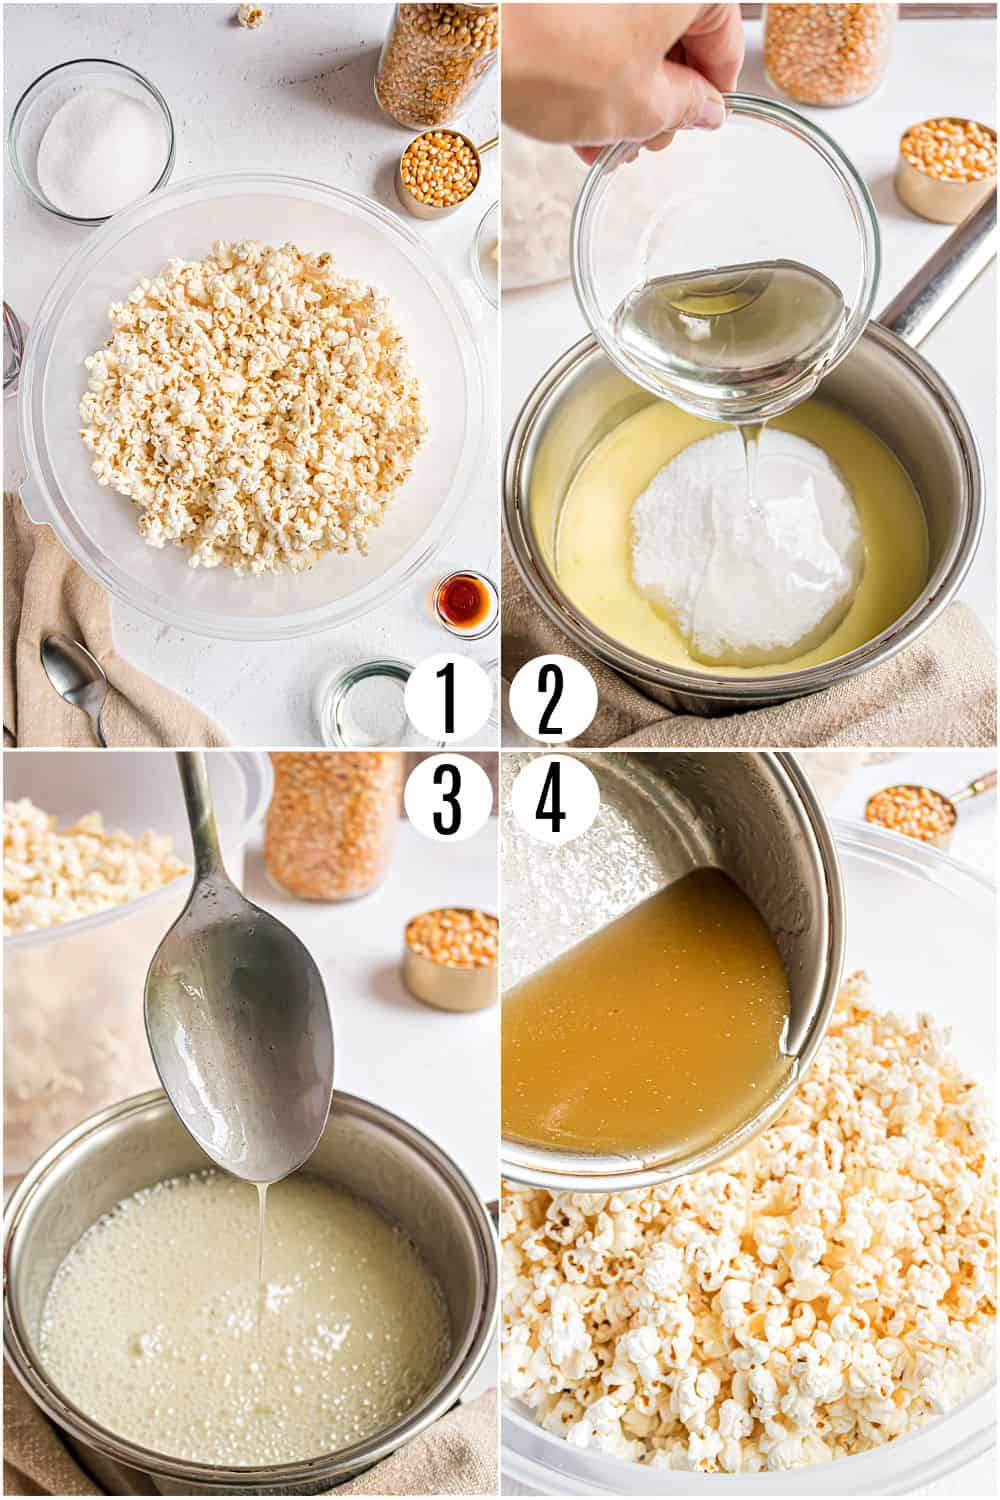 Step by step photos showing how to make popcorn balls.